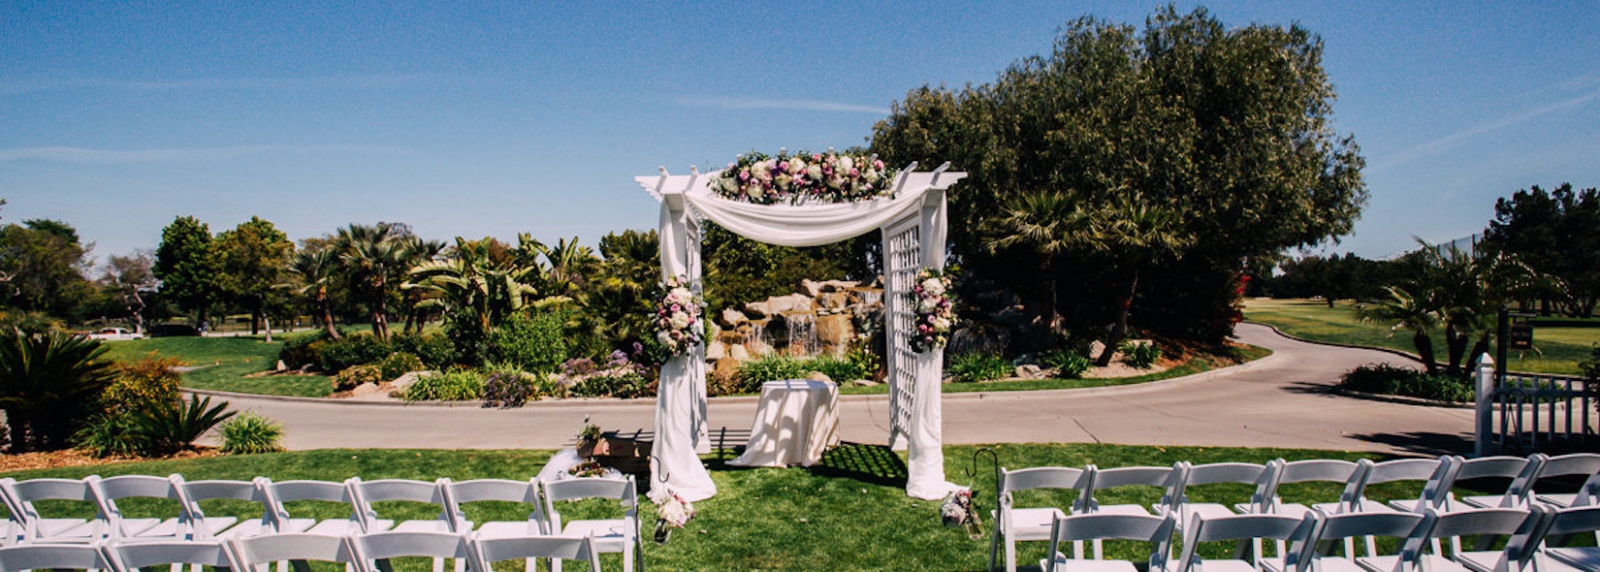 Affordable Outdoor Long Beach Weddings Venue Country Club